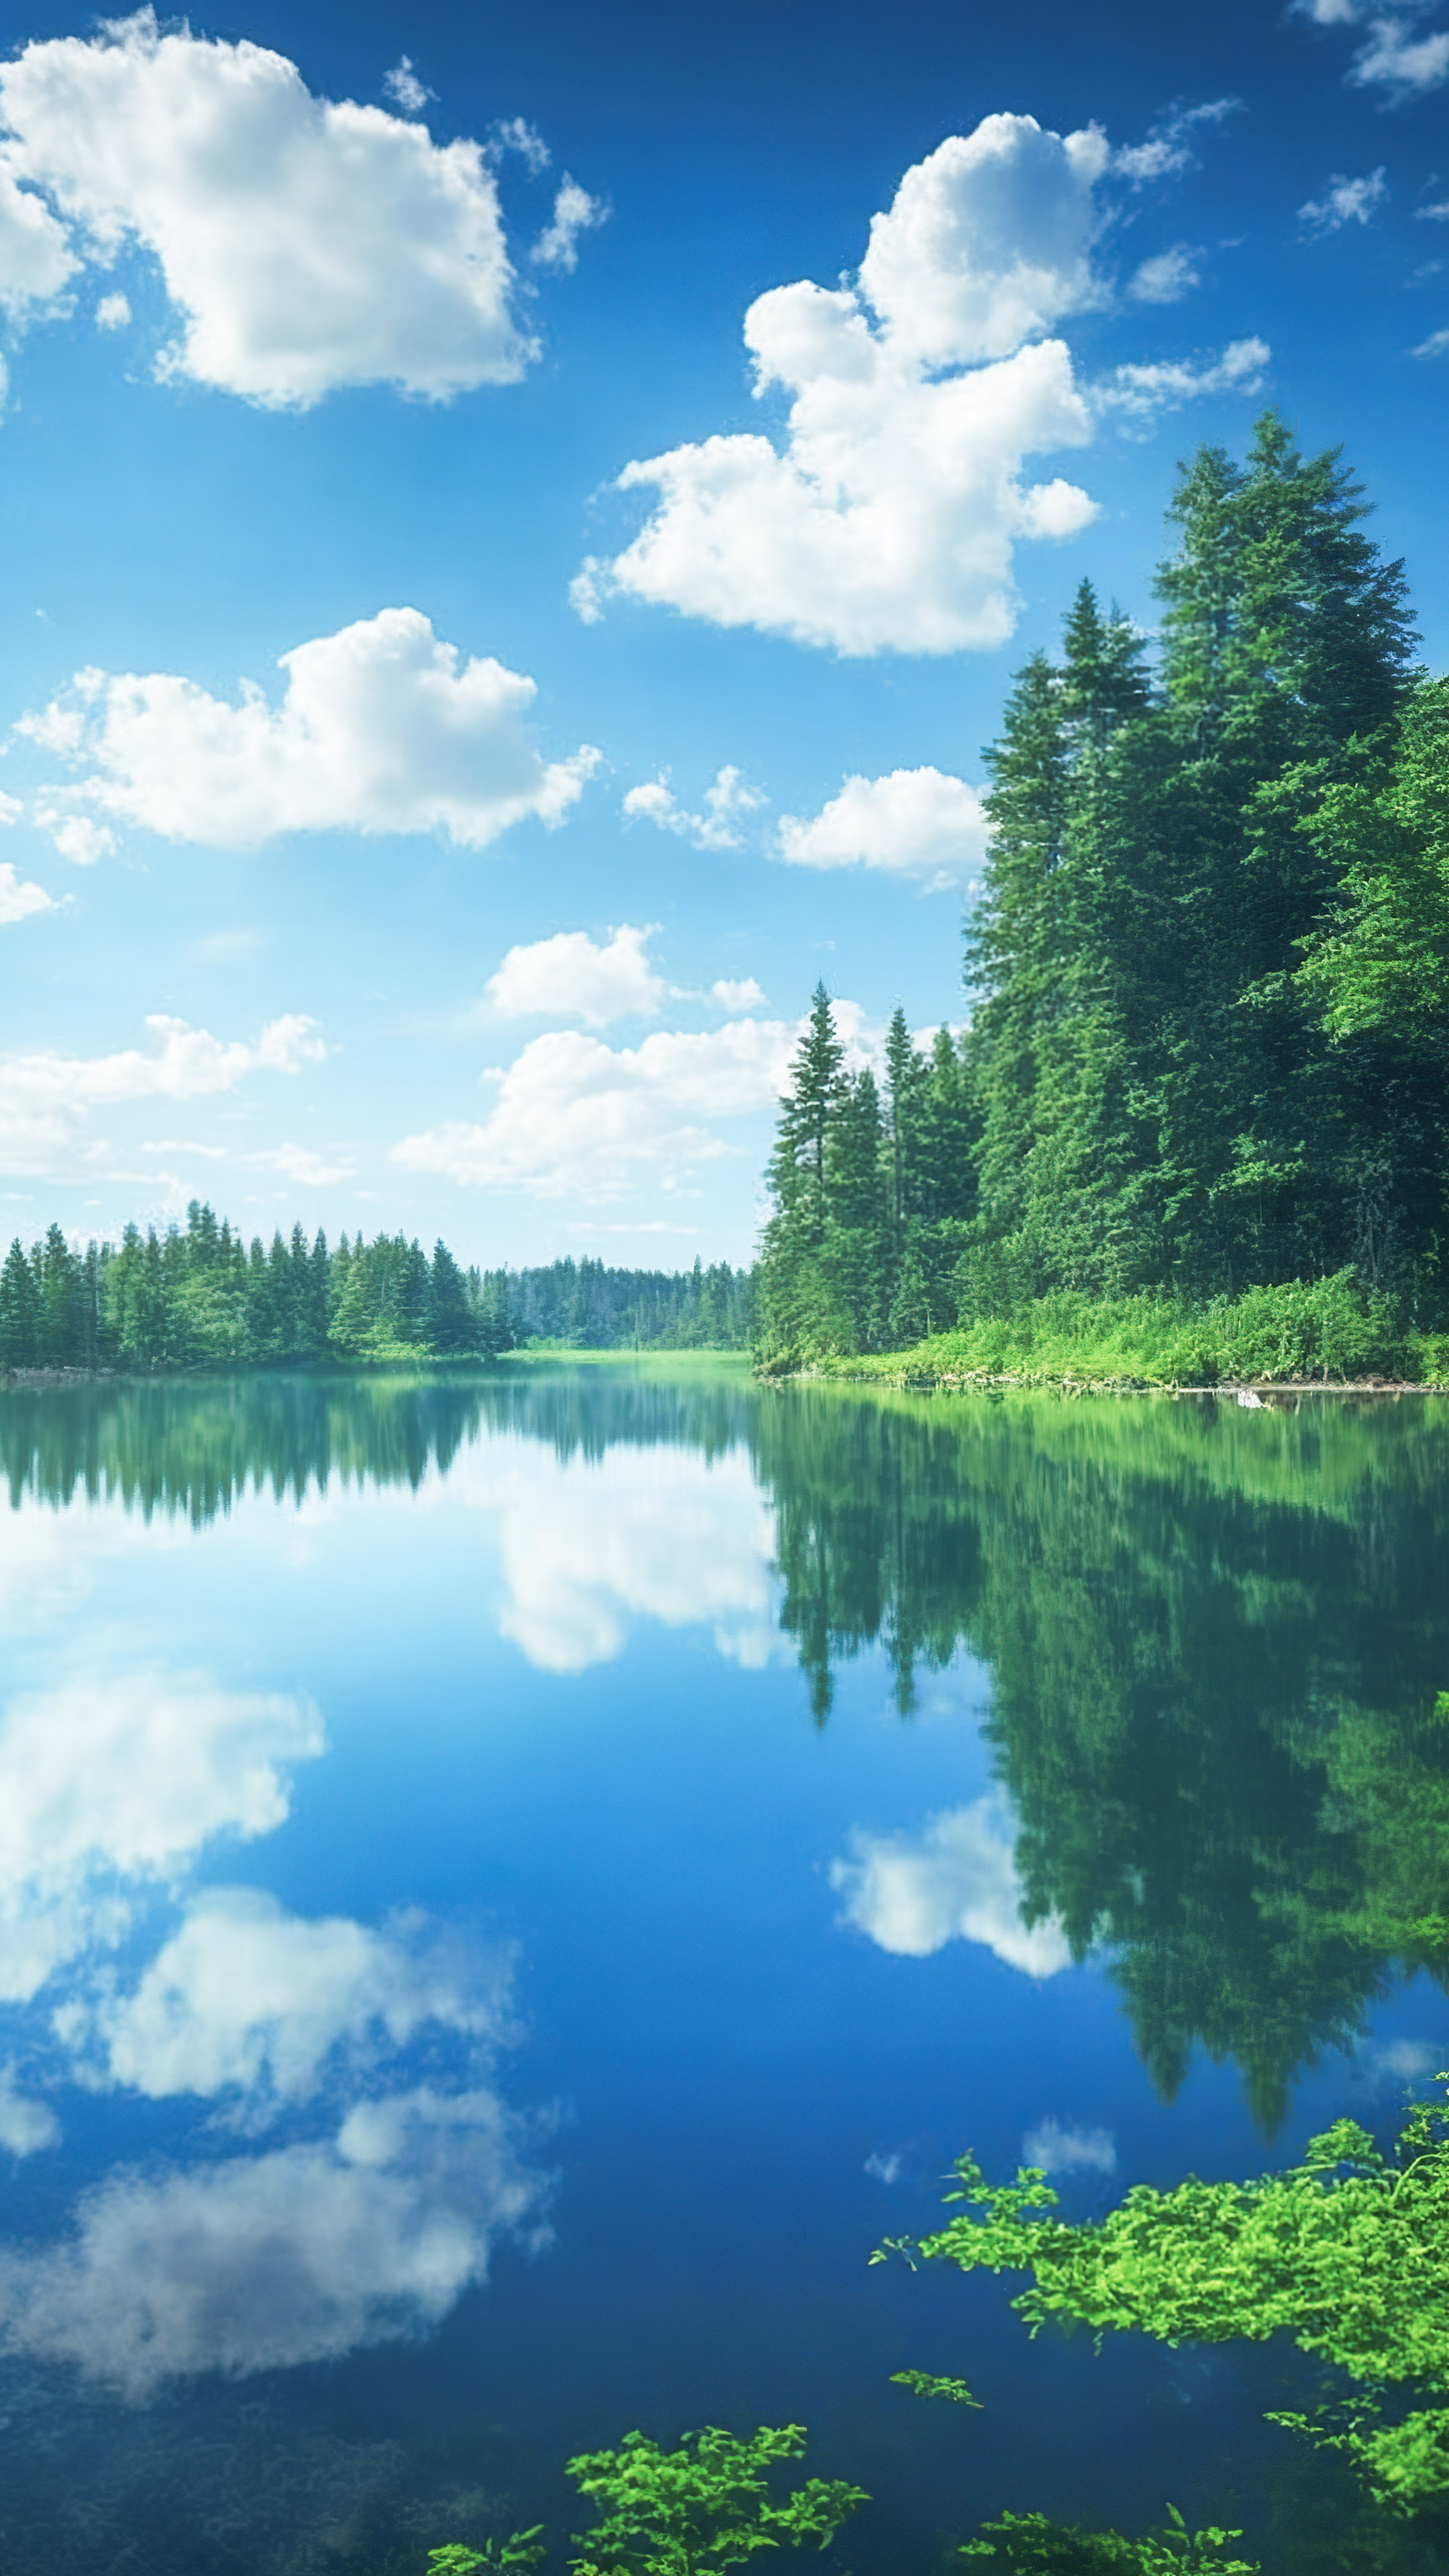 Bring the beauty of nature to your device with natural sky and grass background, featuring a serene lake reflecting a cloud-dappled sky, surrounded by lush, green forests.